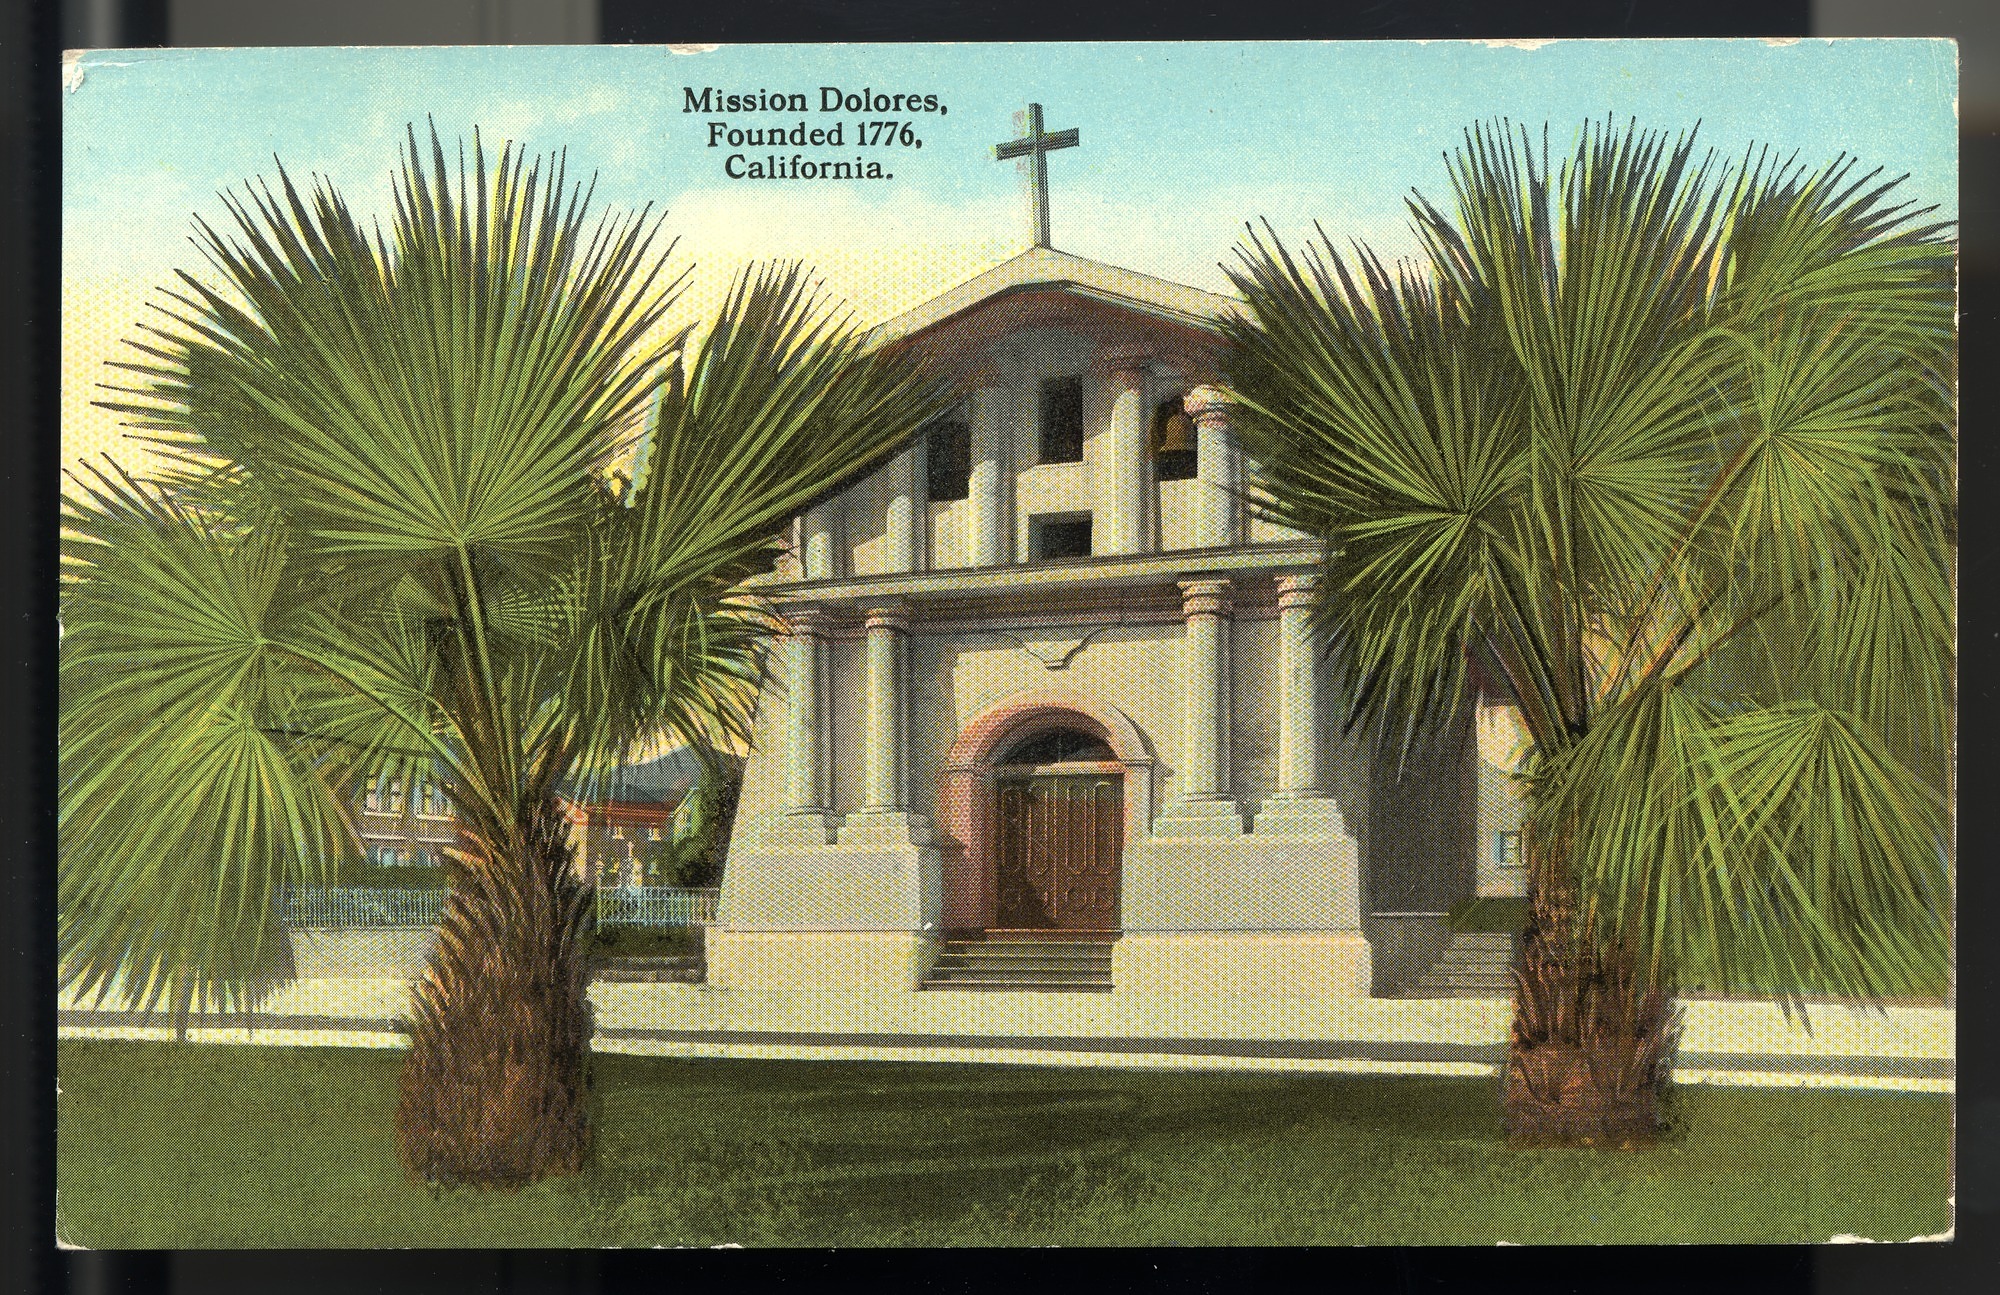 Postcard 22 – Mission Dolores, Founded 1776, California. I. L. Eno Company. Curt Teich Company. ca 1910 or 1913. NMAH 1986.0639.0375.